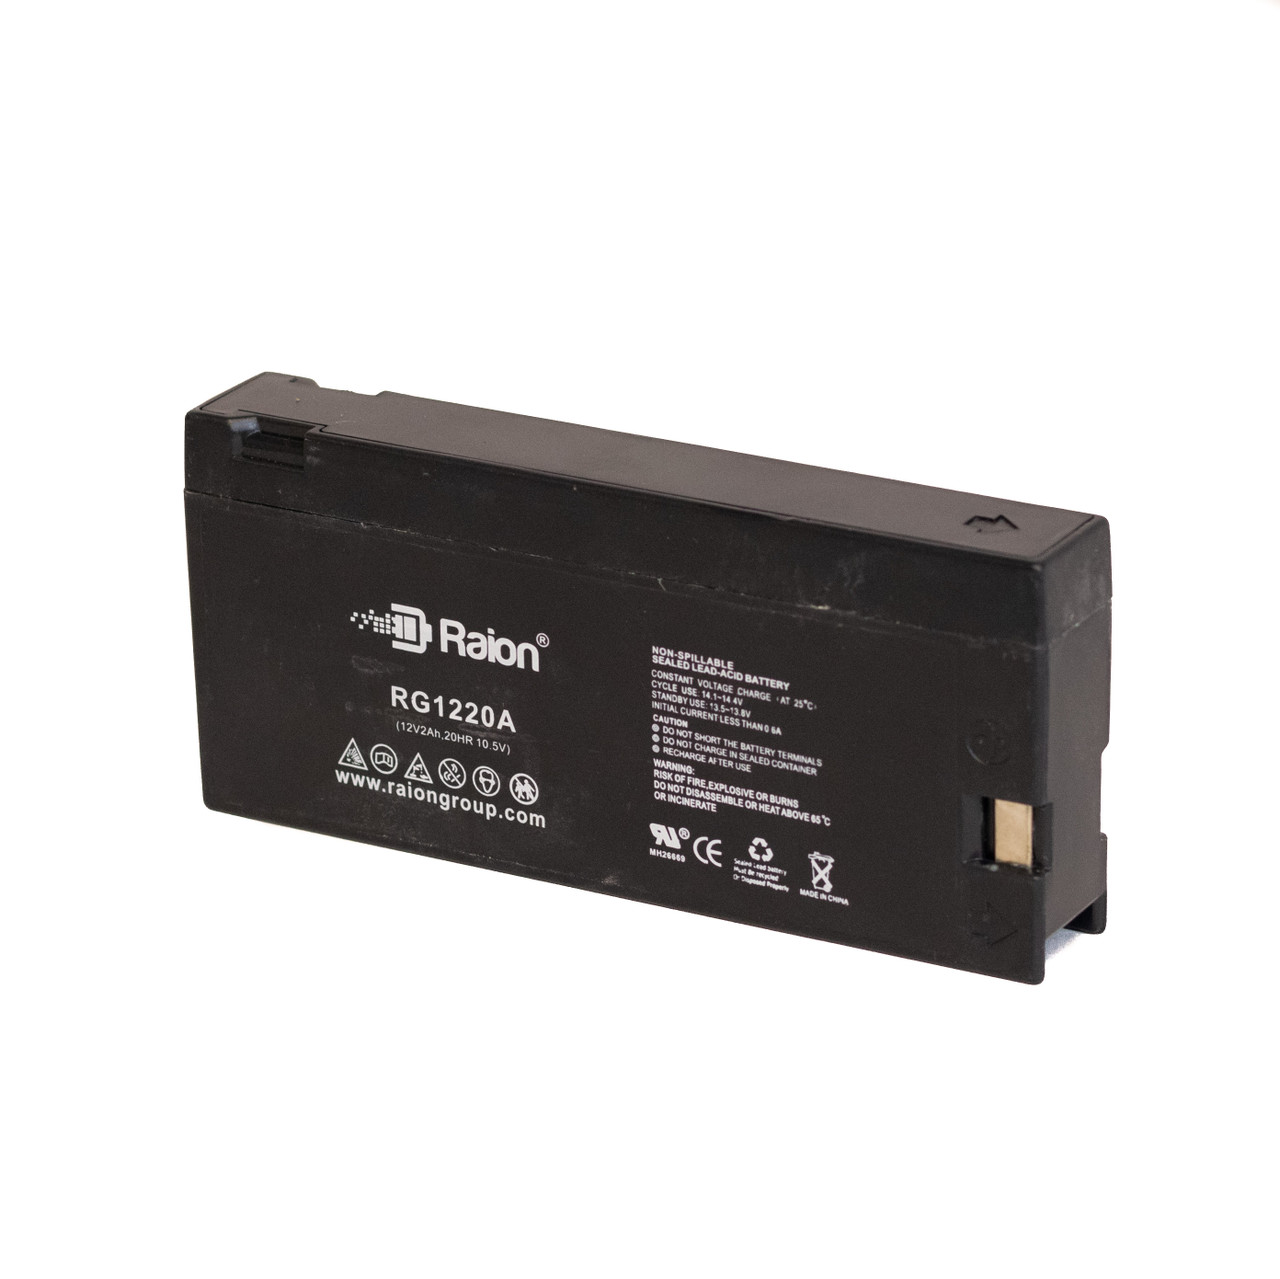 Raion Power RG1220A Replacement Battery for Sunlight SPA 12-2C